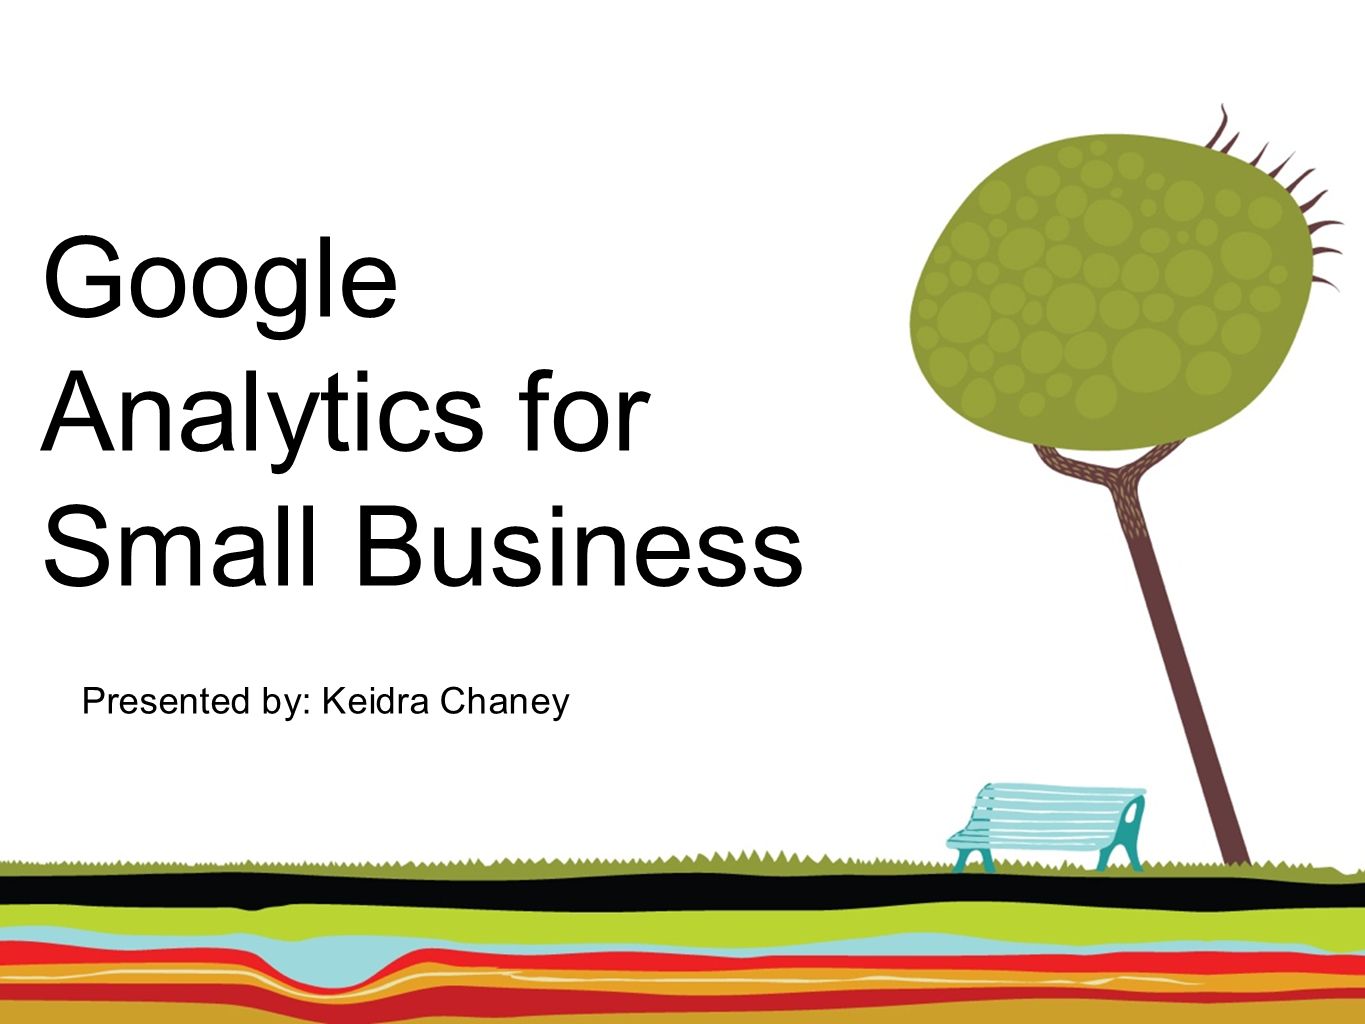 Google Analytics for Small Business Presented by: Keidra Chaney